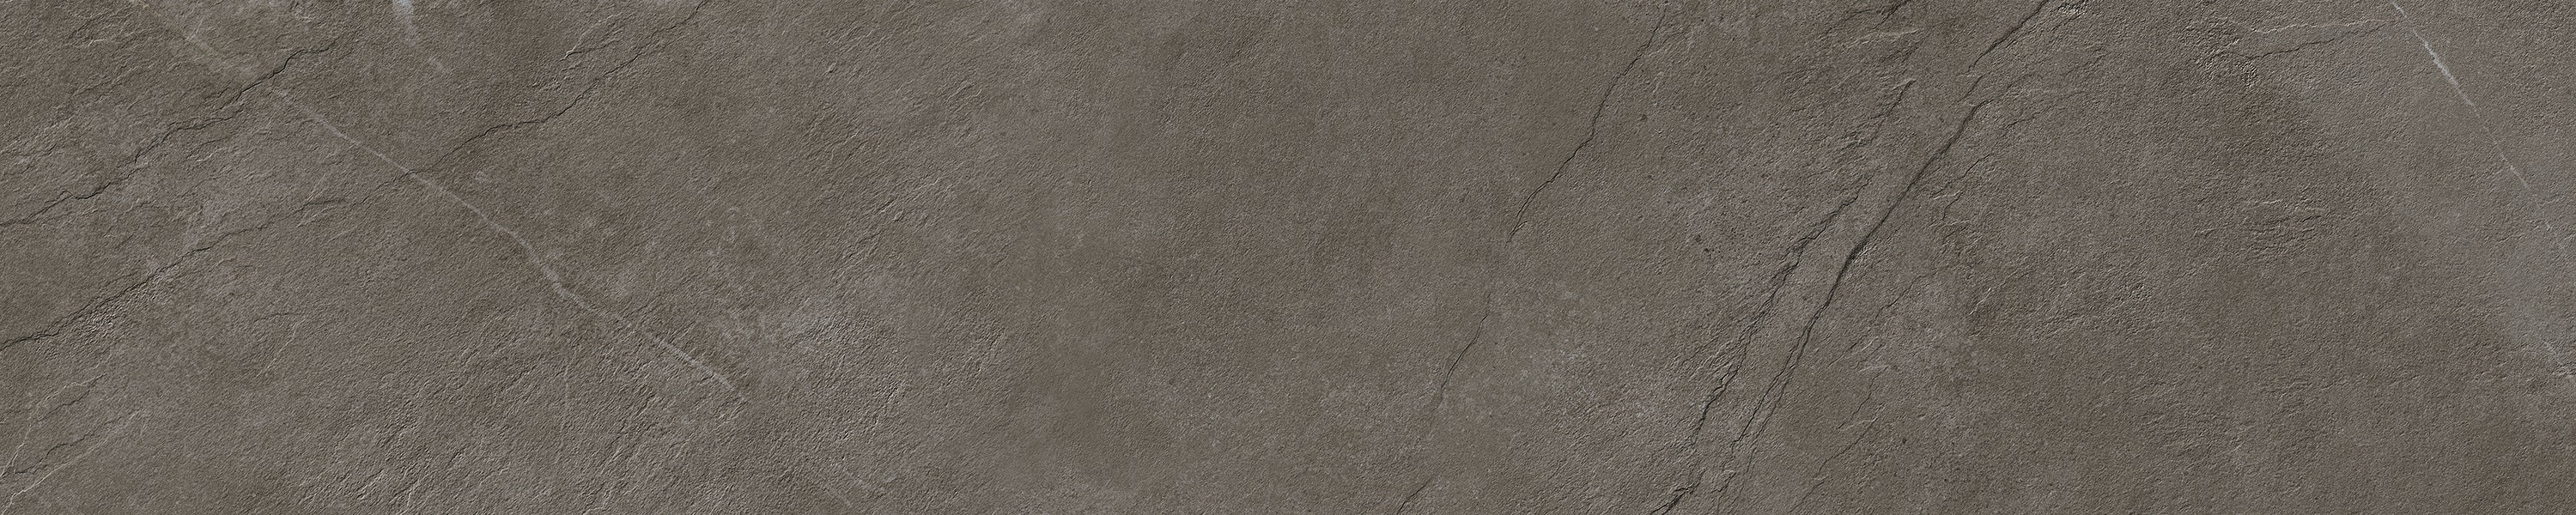 landmark 9mm journey contemporary dark field tile 7_75x40x9mm matte rectified porcelain tile distributed by surface group international